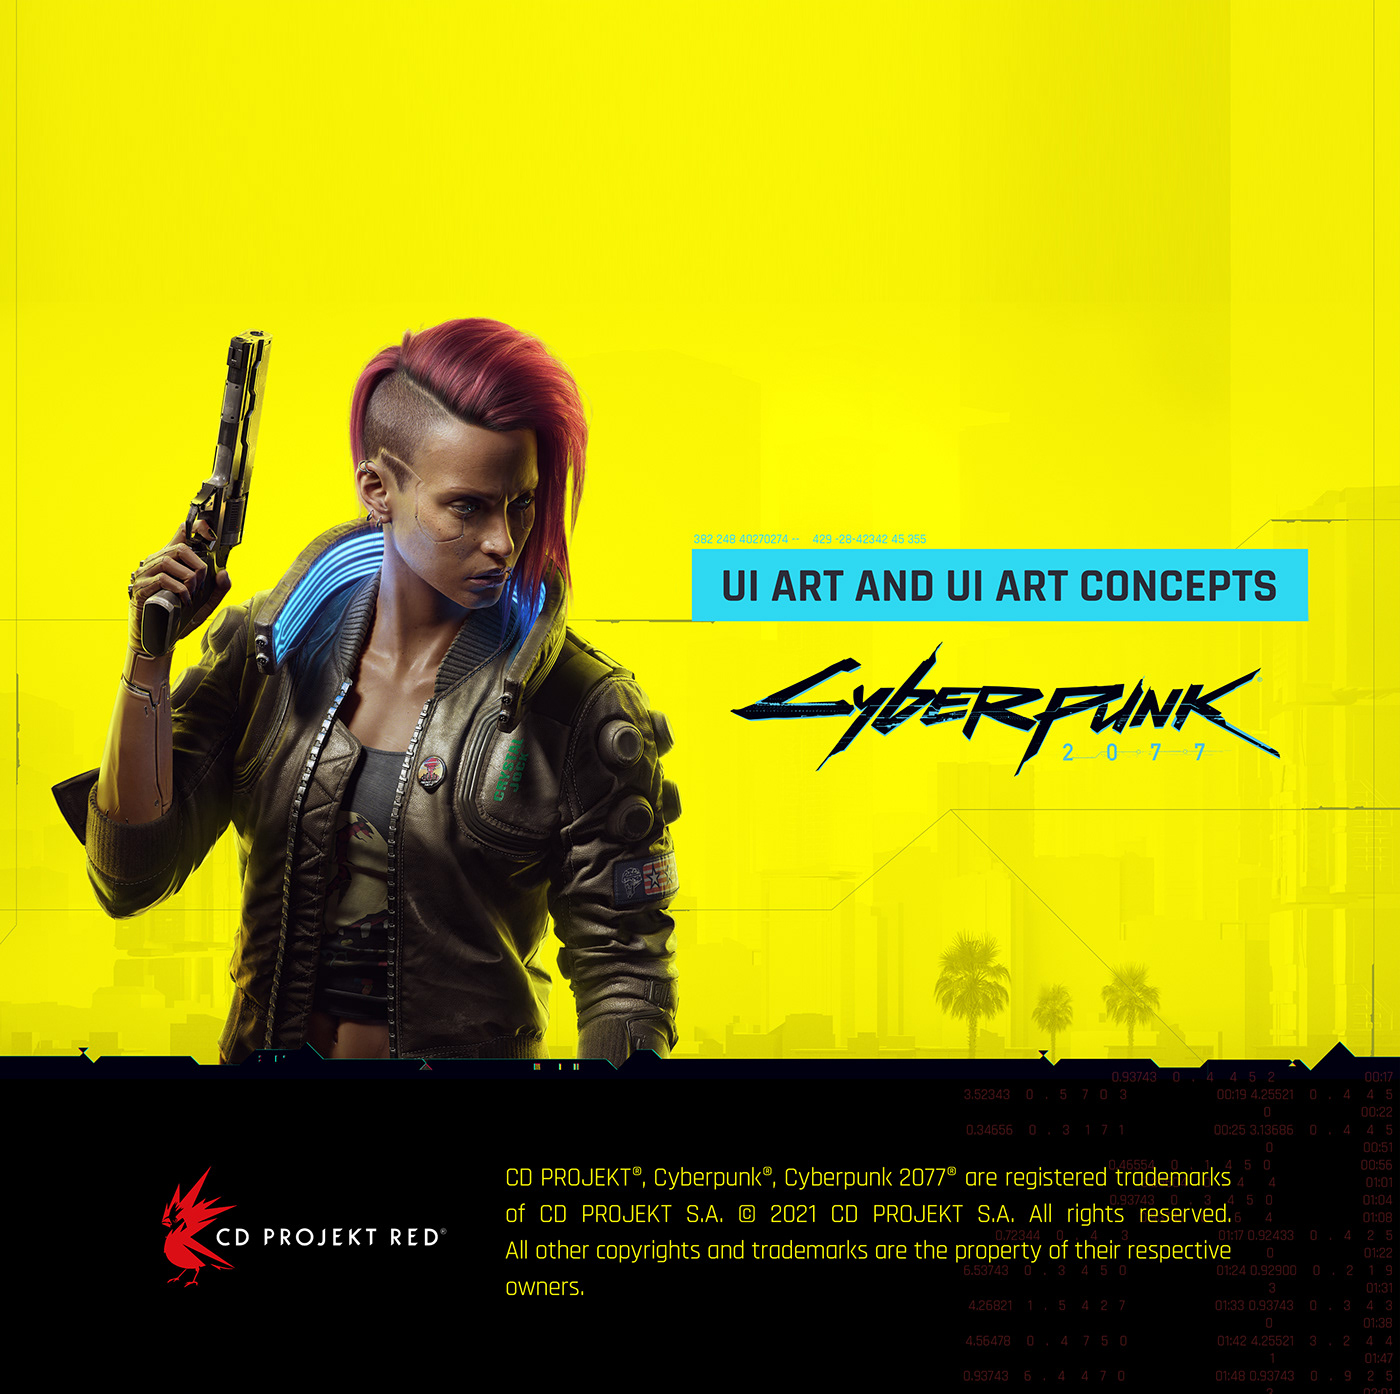 CdP CDProjektRed Cyberpunk cyberpunk 2077 Cyberpunk art Game Art UI UIART uigame ux